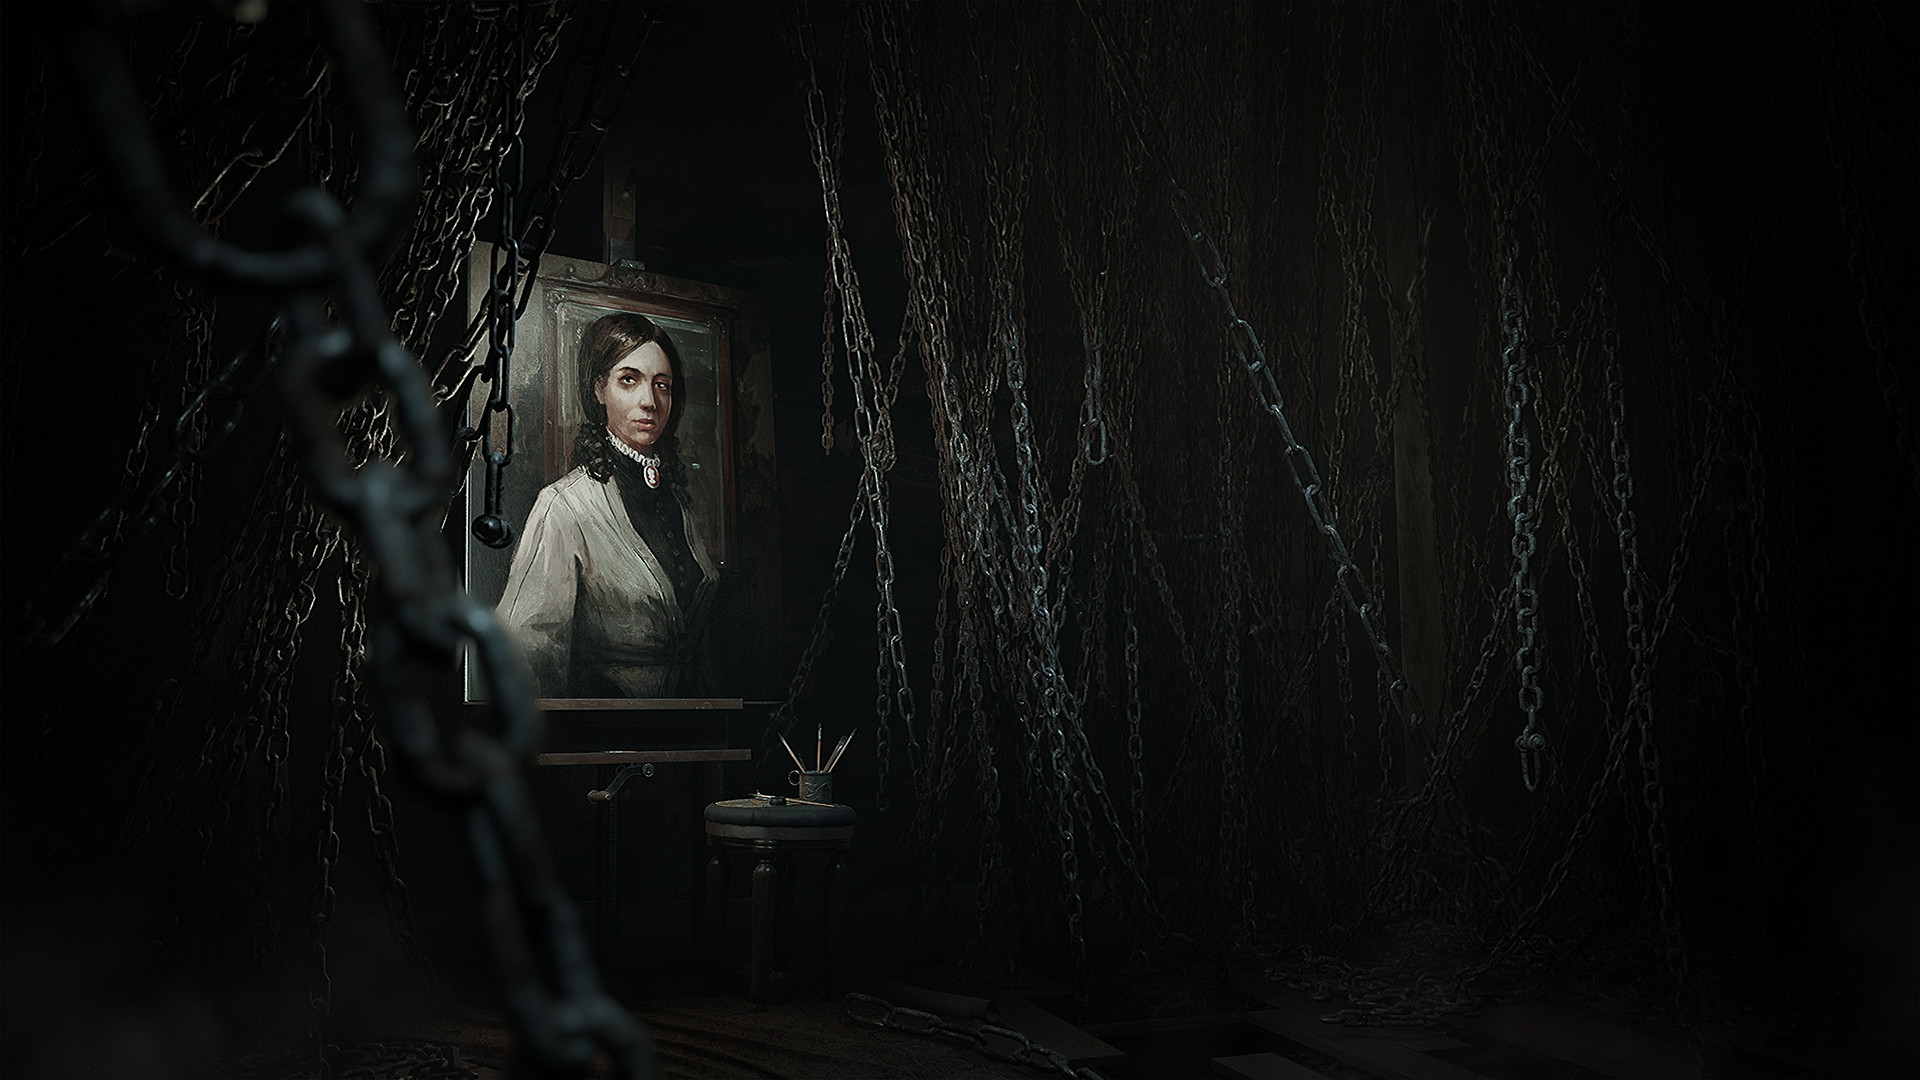 LAYERS OF FEAR 2 Gameplay Trailer (2019) PS4 / Xbox One / PC 